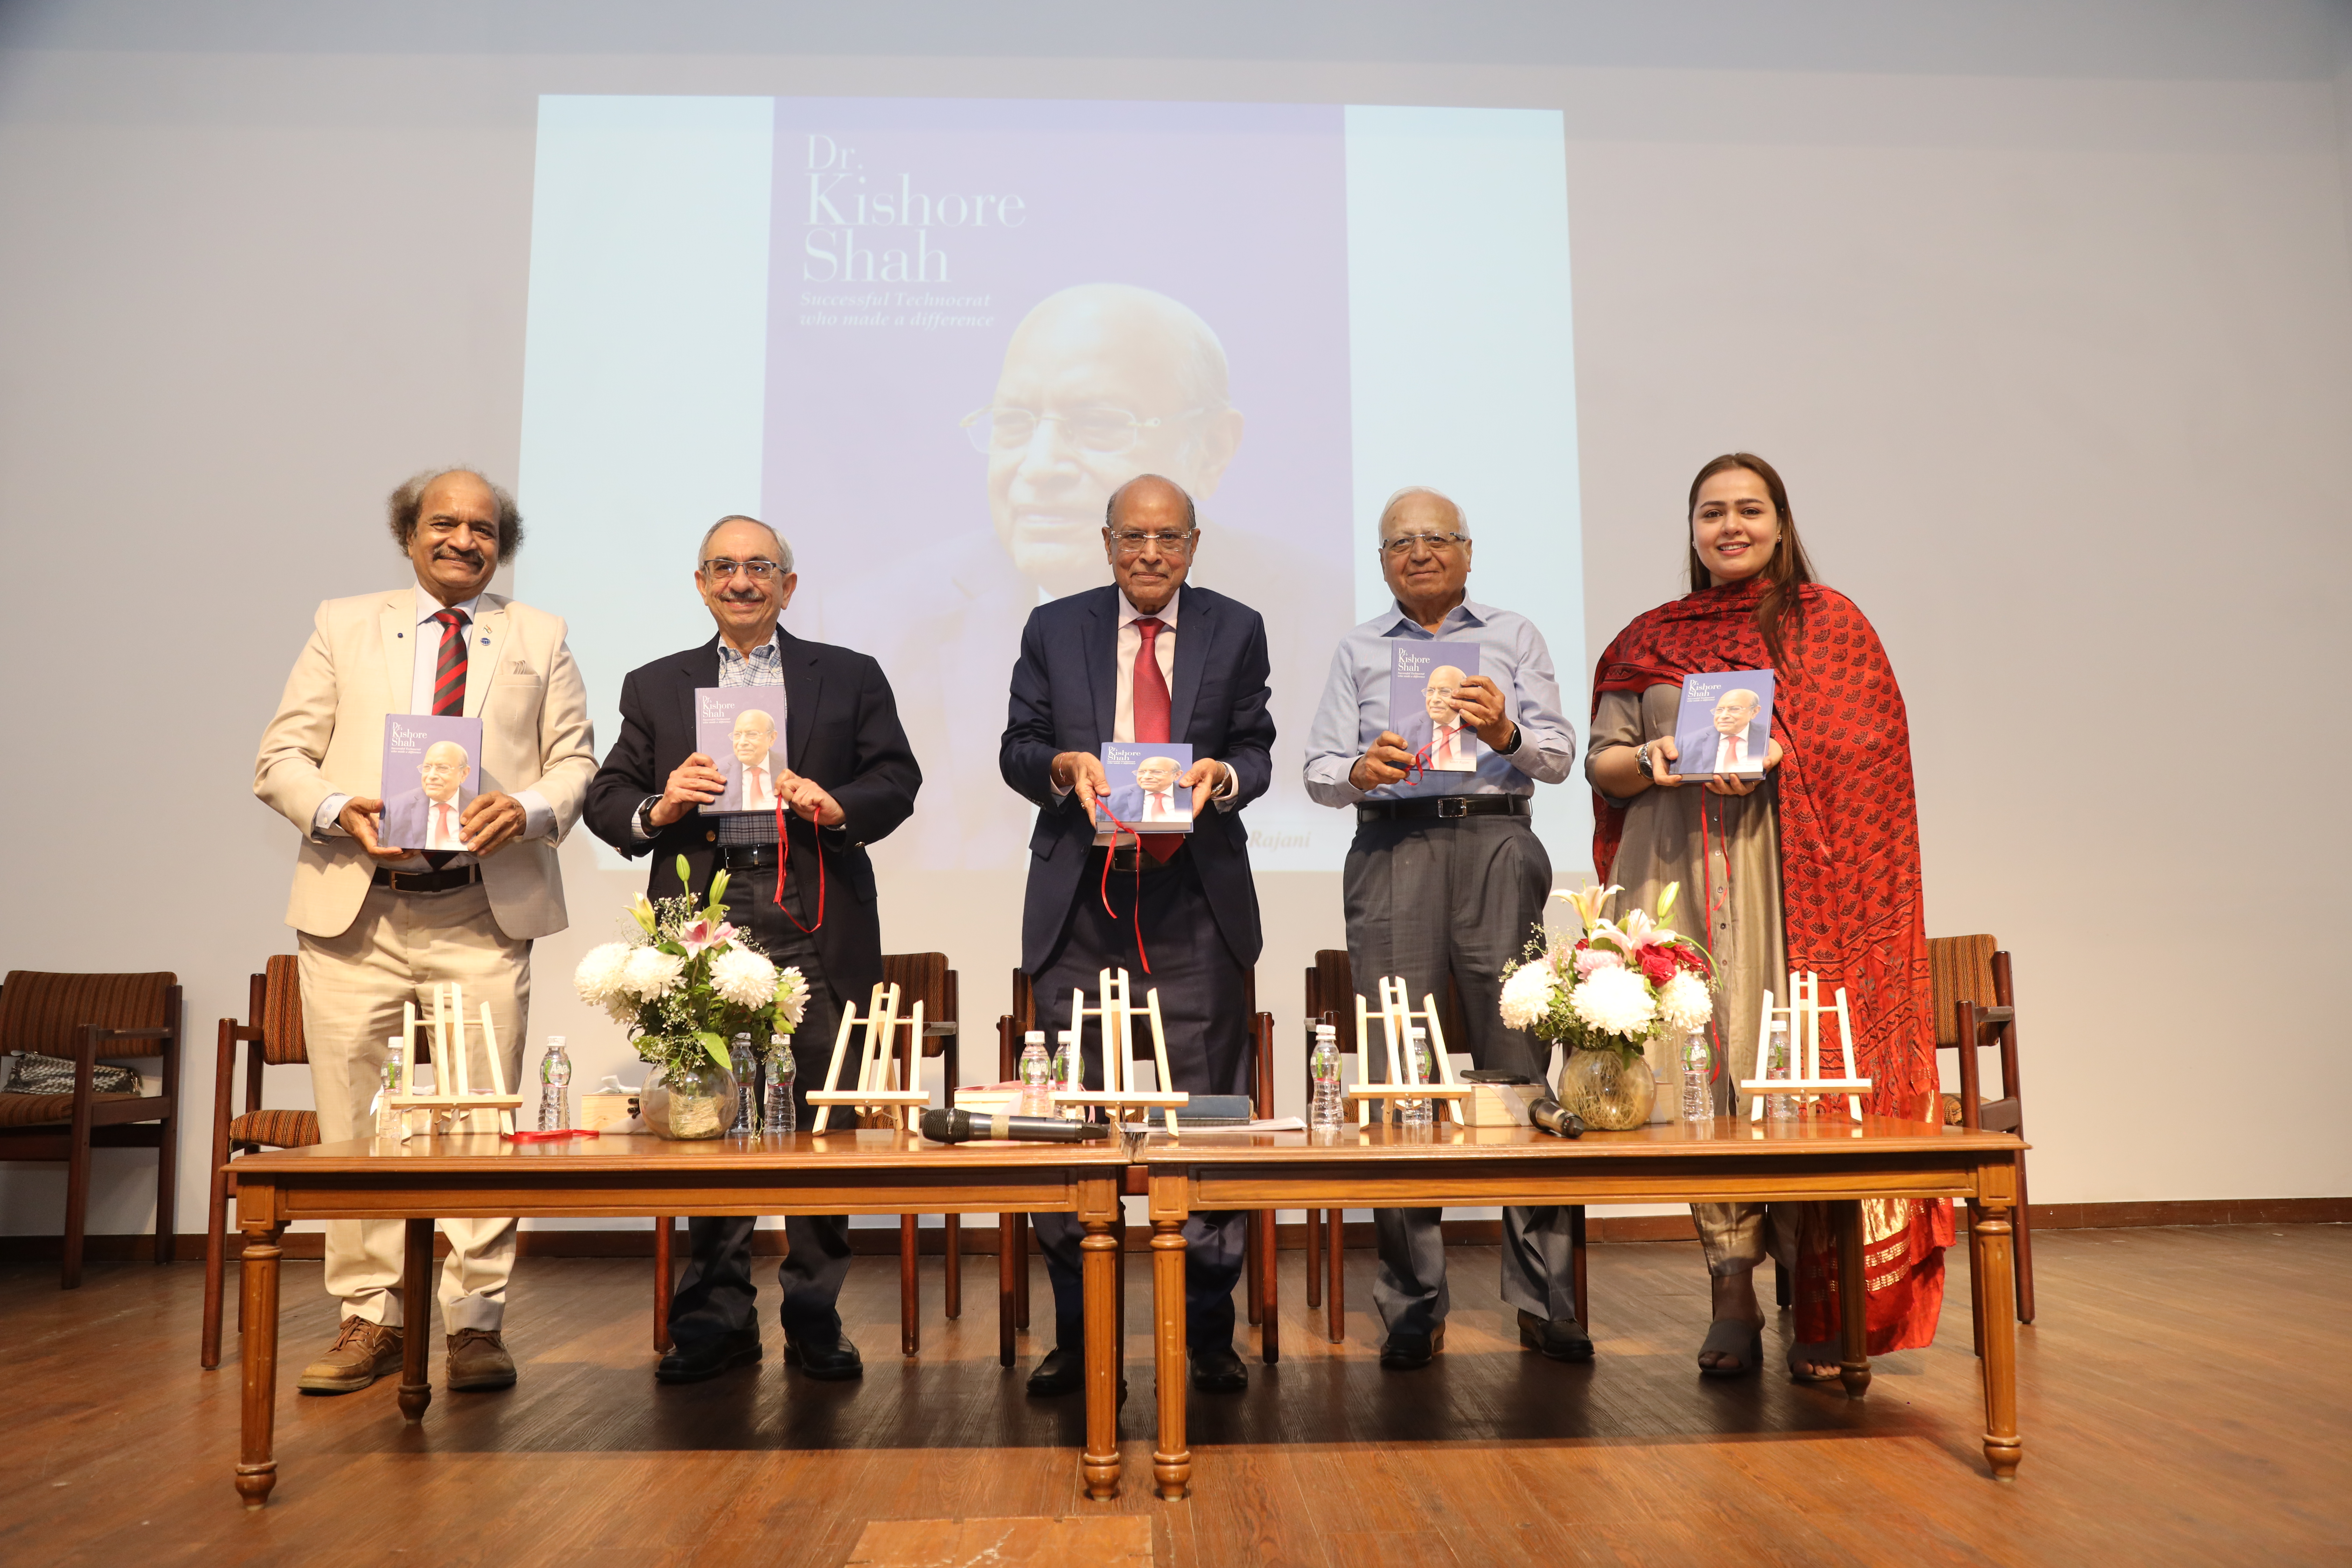 Dr. Kishore Shahâ€™s Biography released